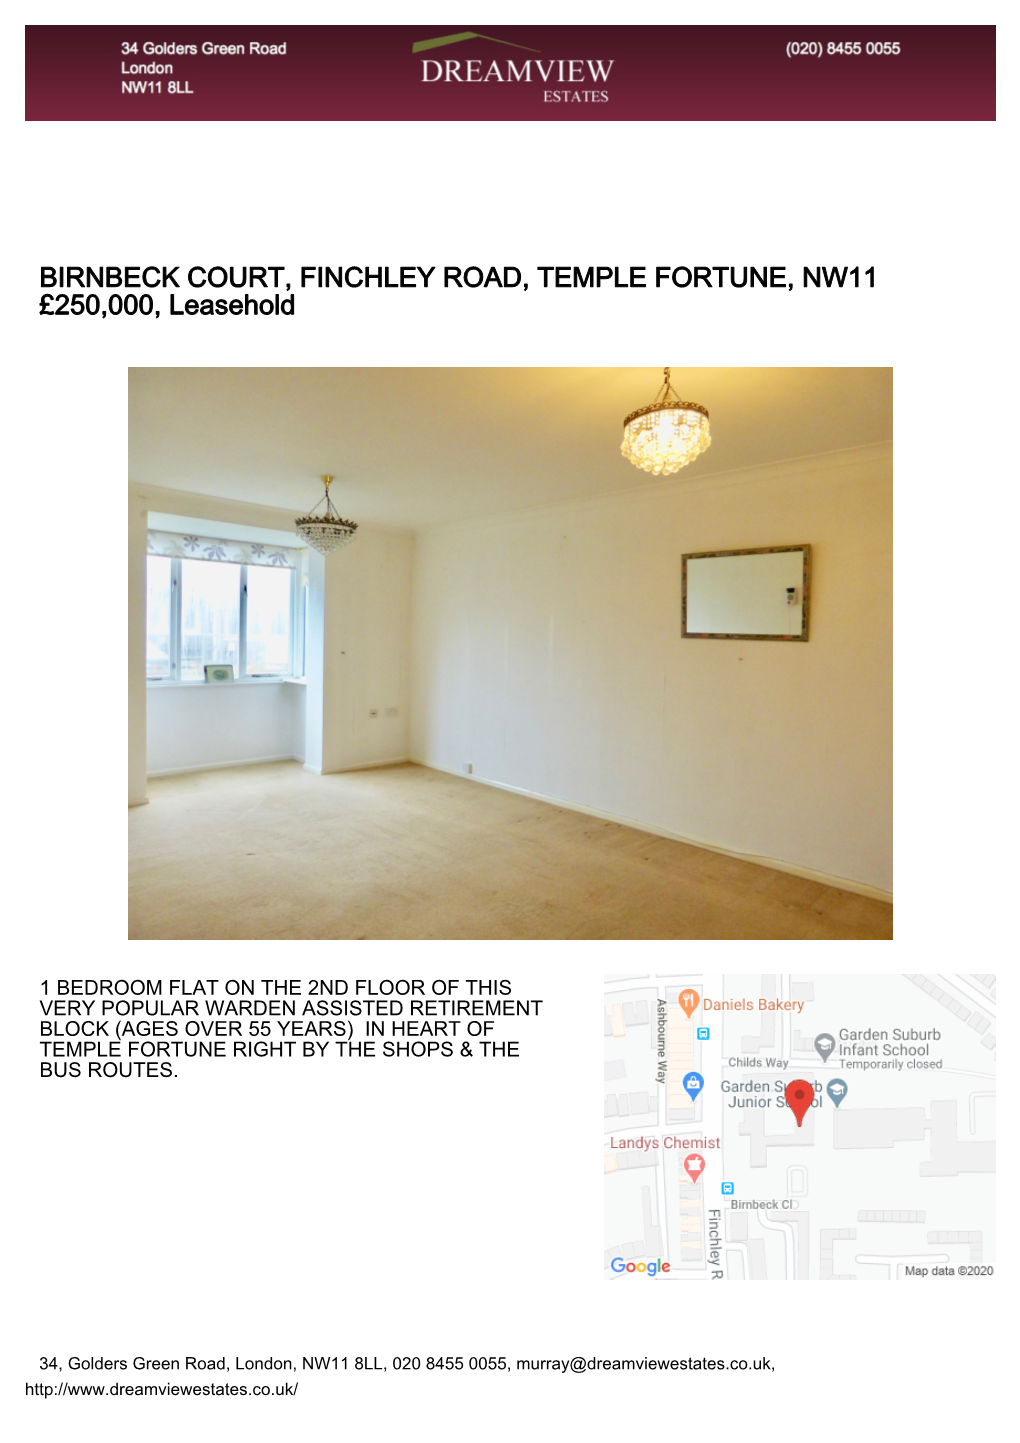 BIRNBECK COURT, FINCHLEY ROAD, TEMPLE FORTUNE, NW11 £250,000, Leasehold